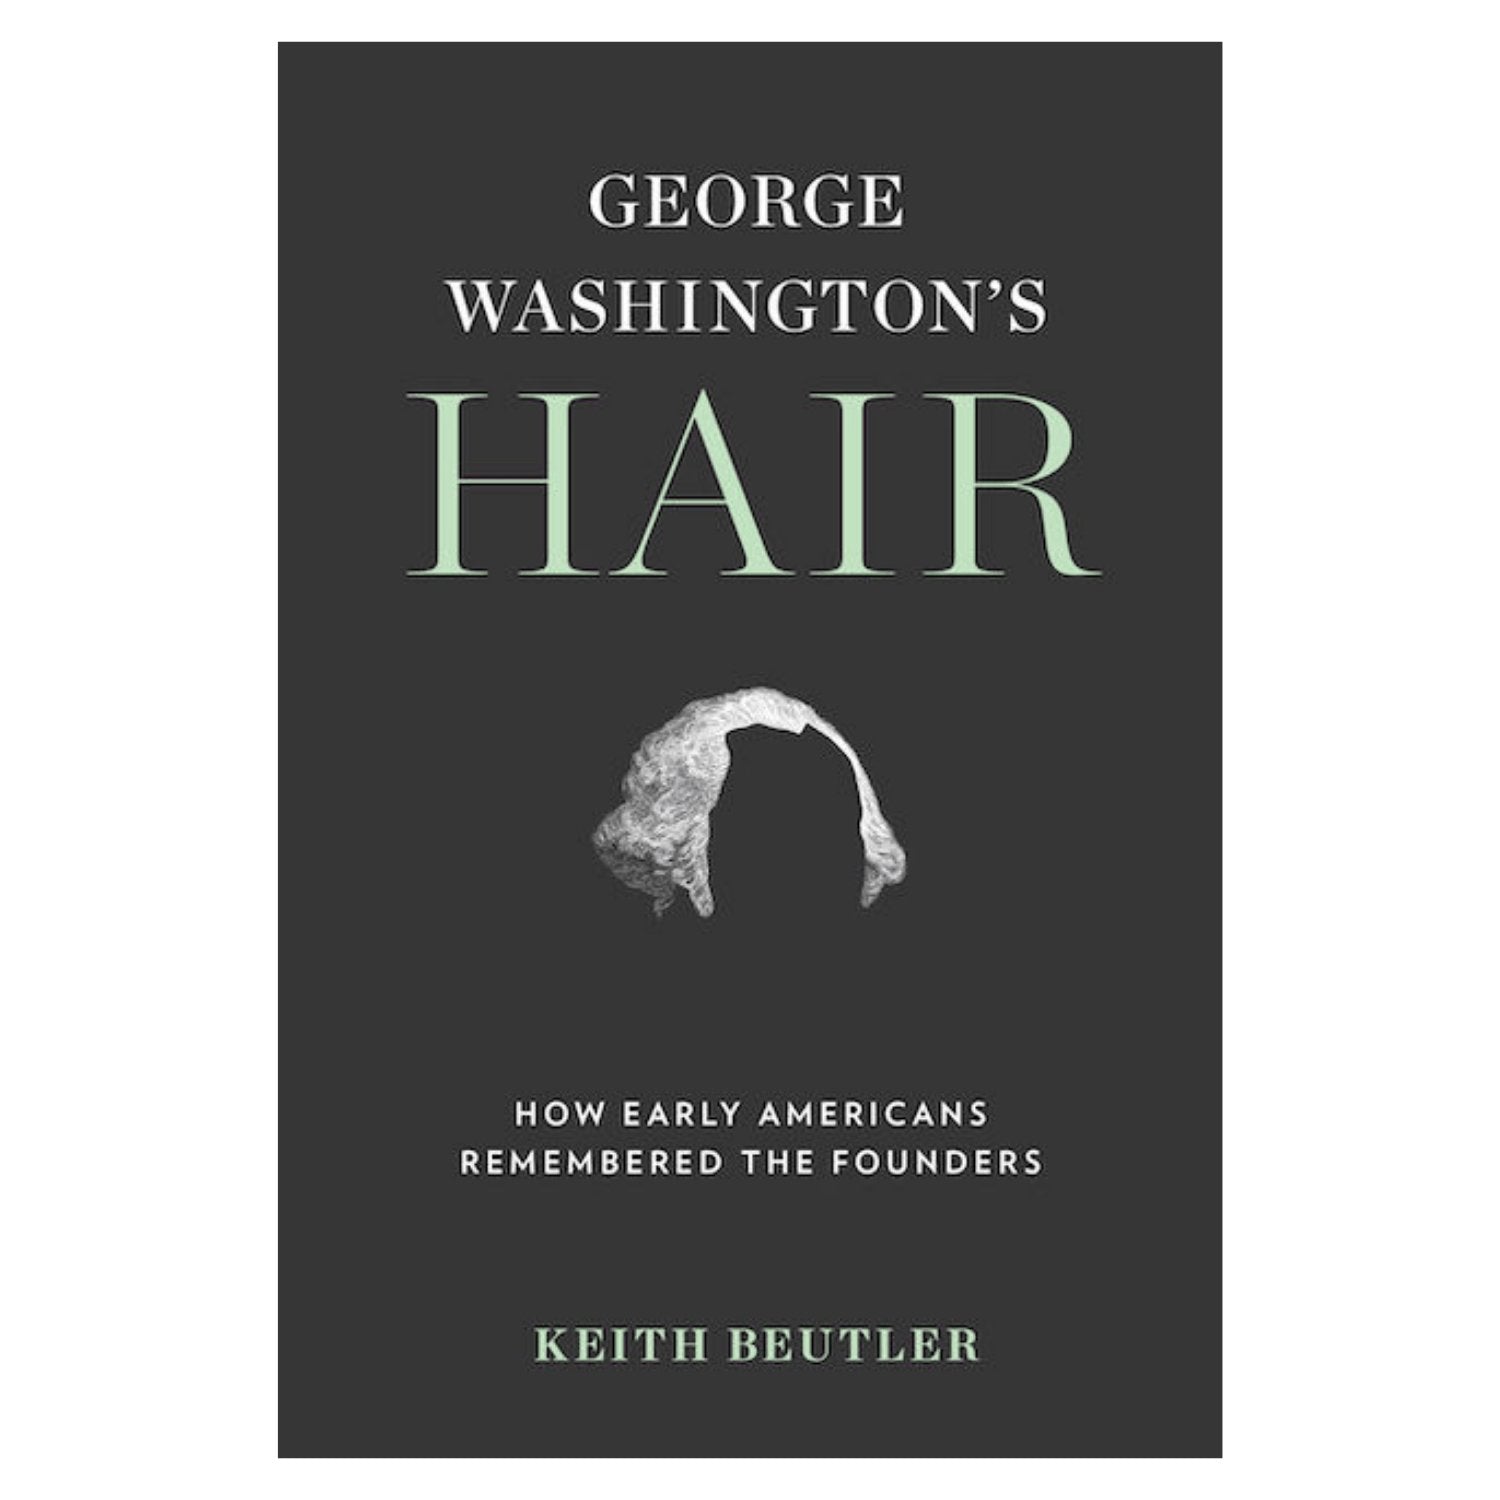 George Washington's Hair: How Early Americans Remembered the Founders